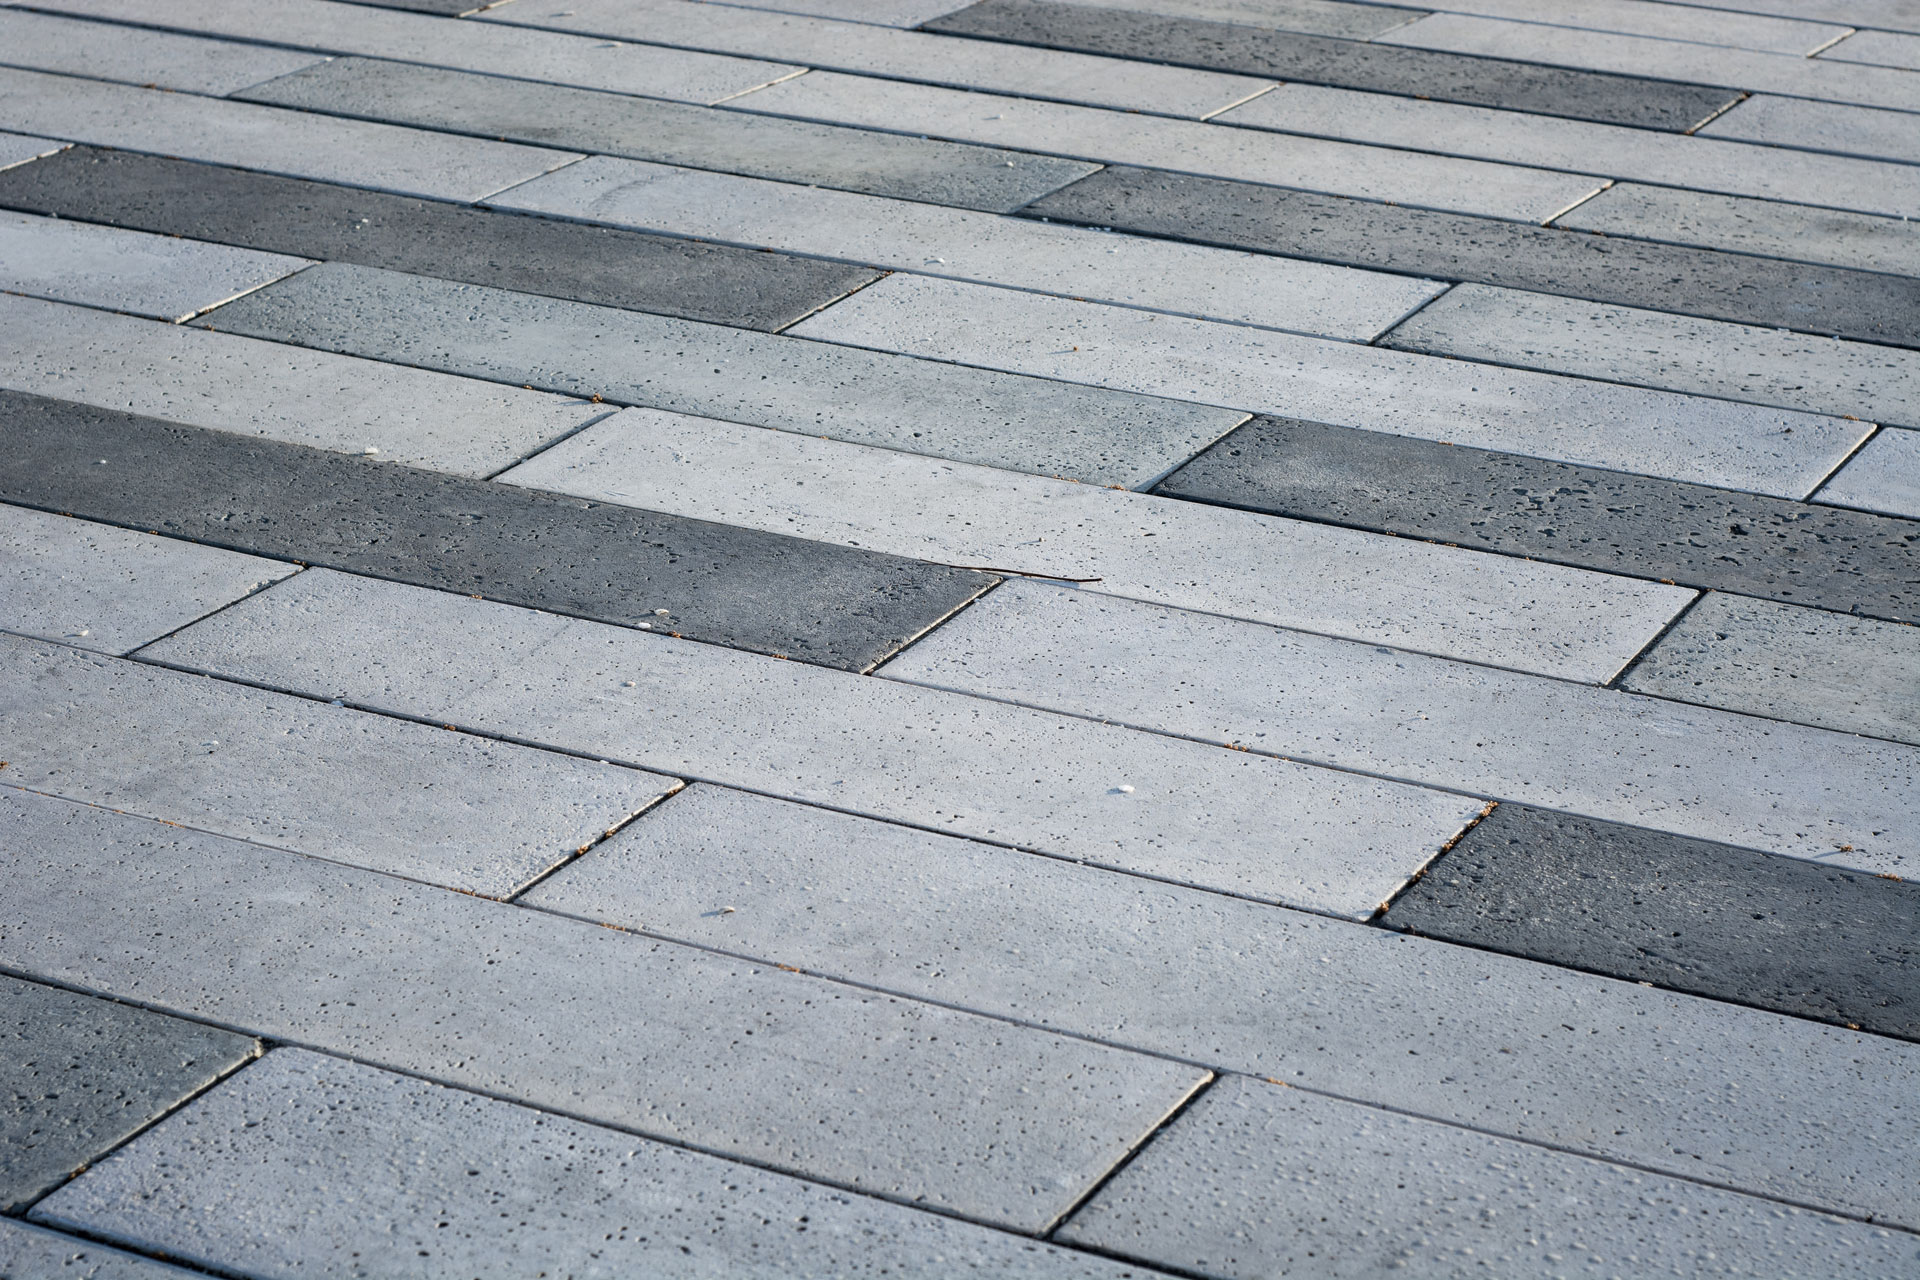 The multiple paver colors of these rectangle pavers break up the surface pattern